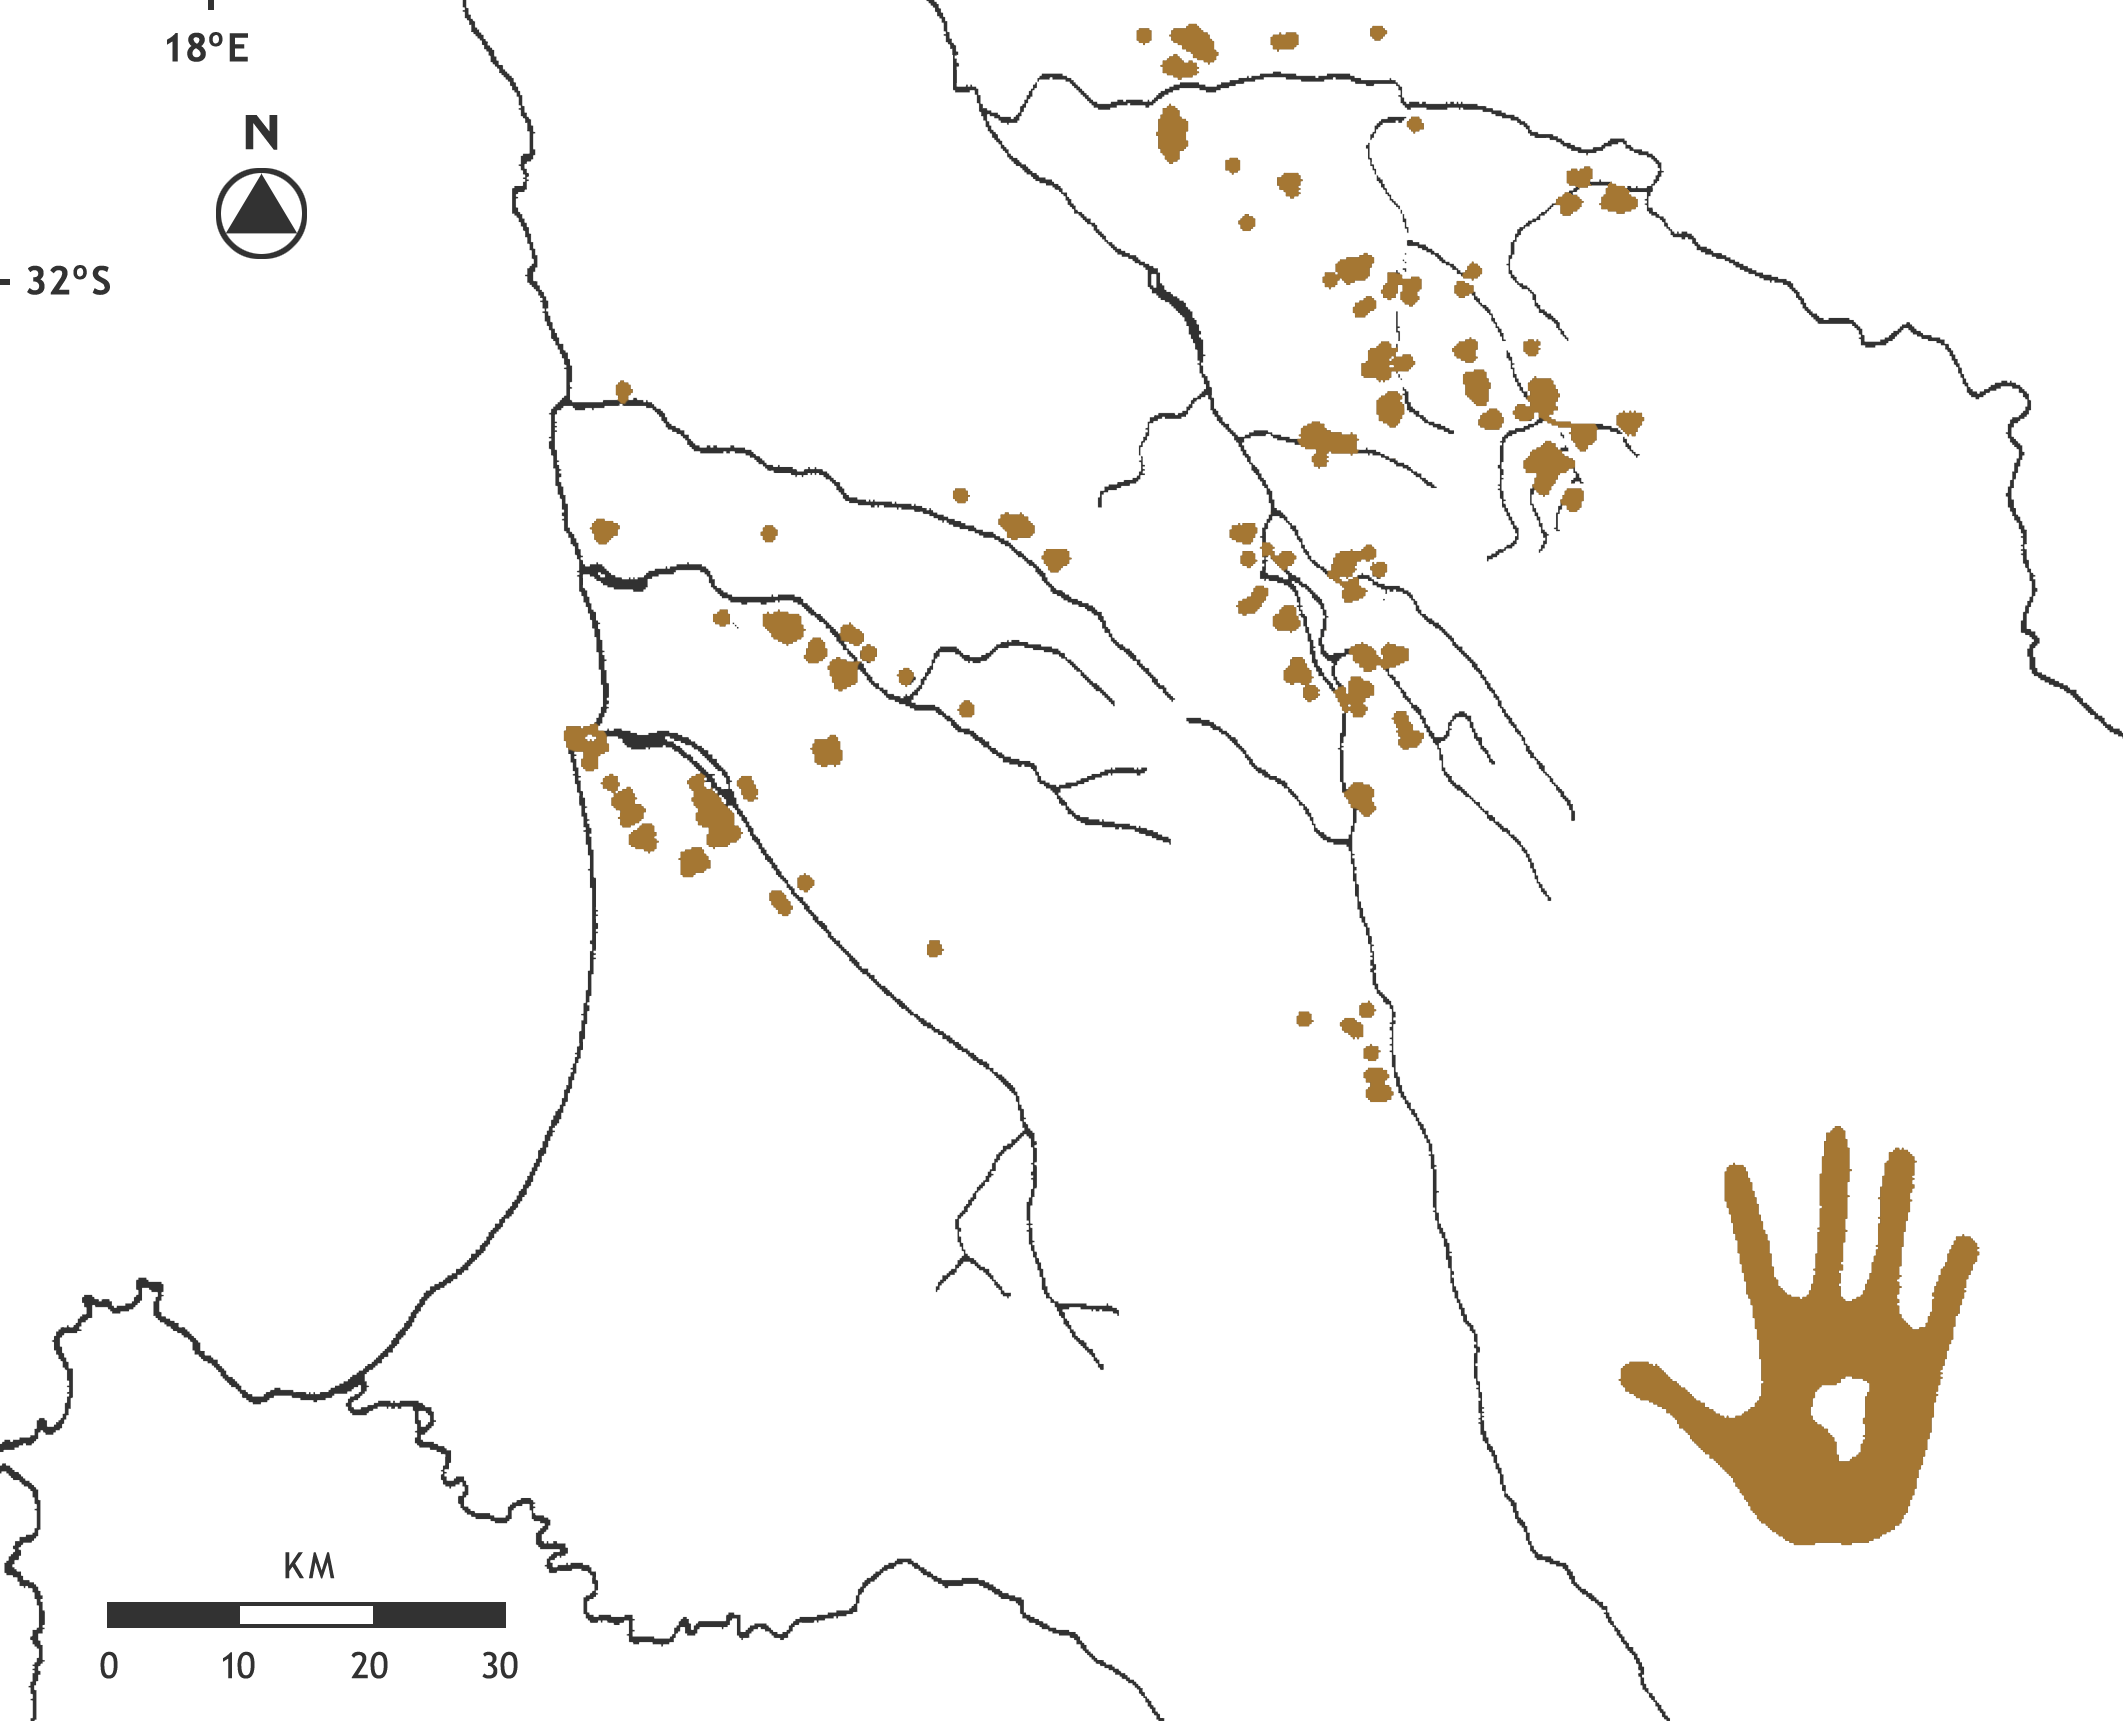 Hand prints from the south-western Cape